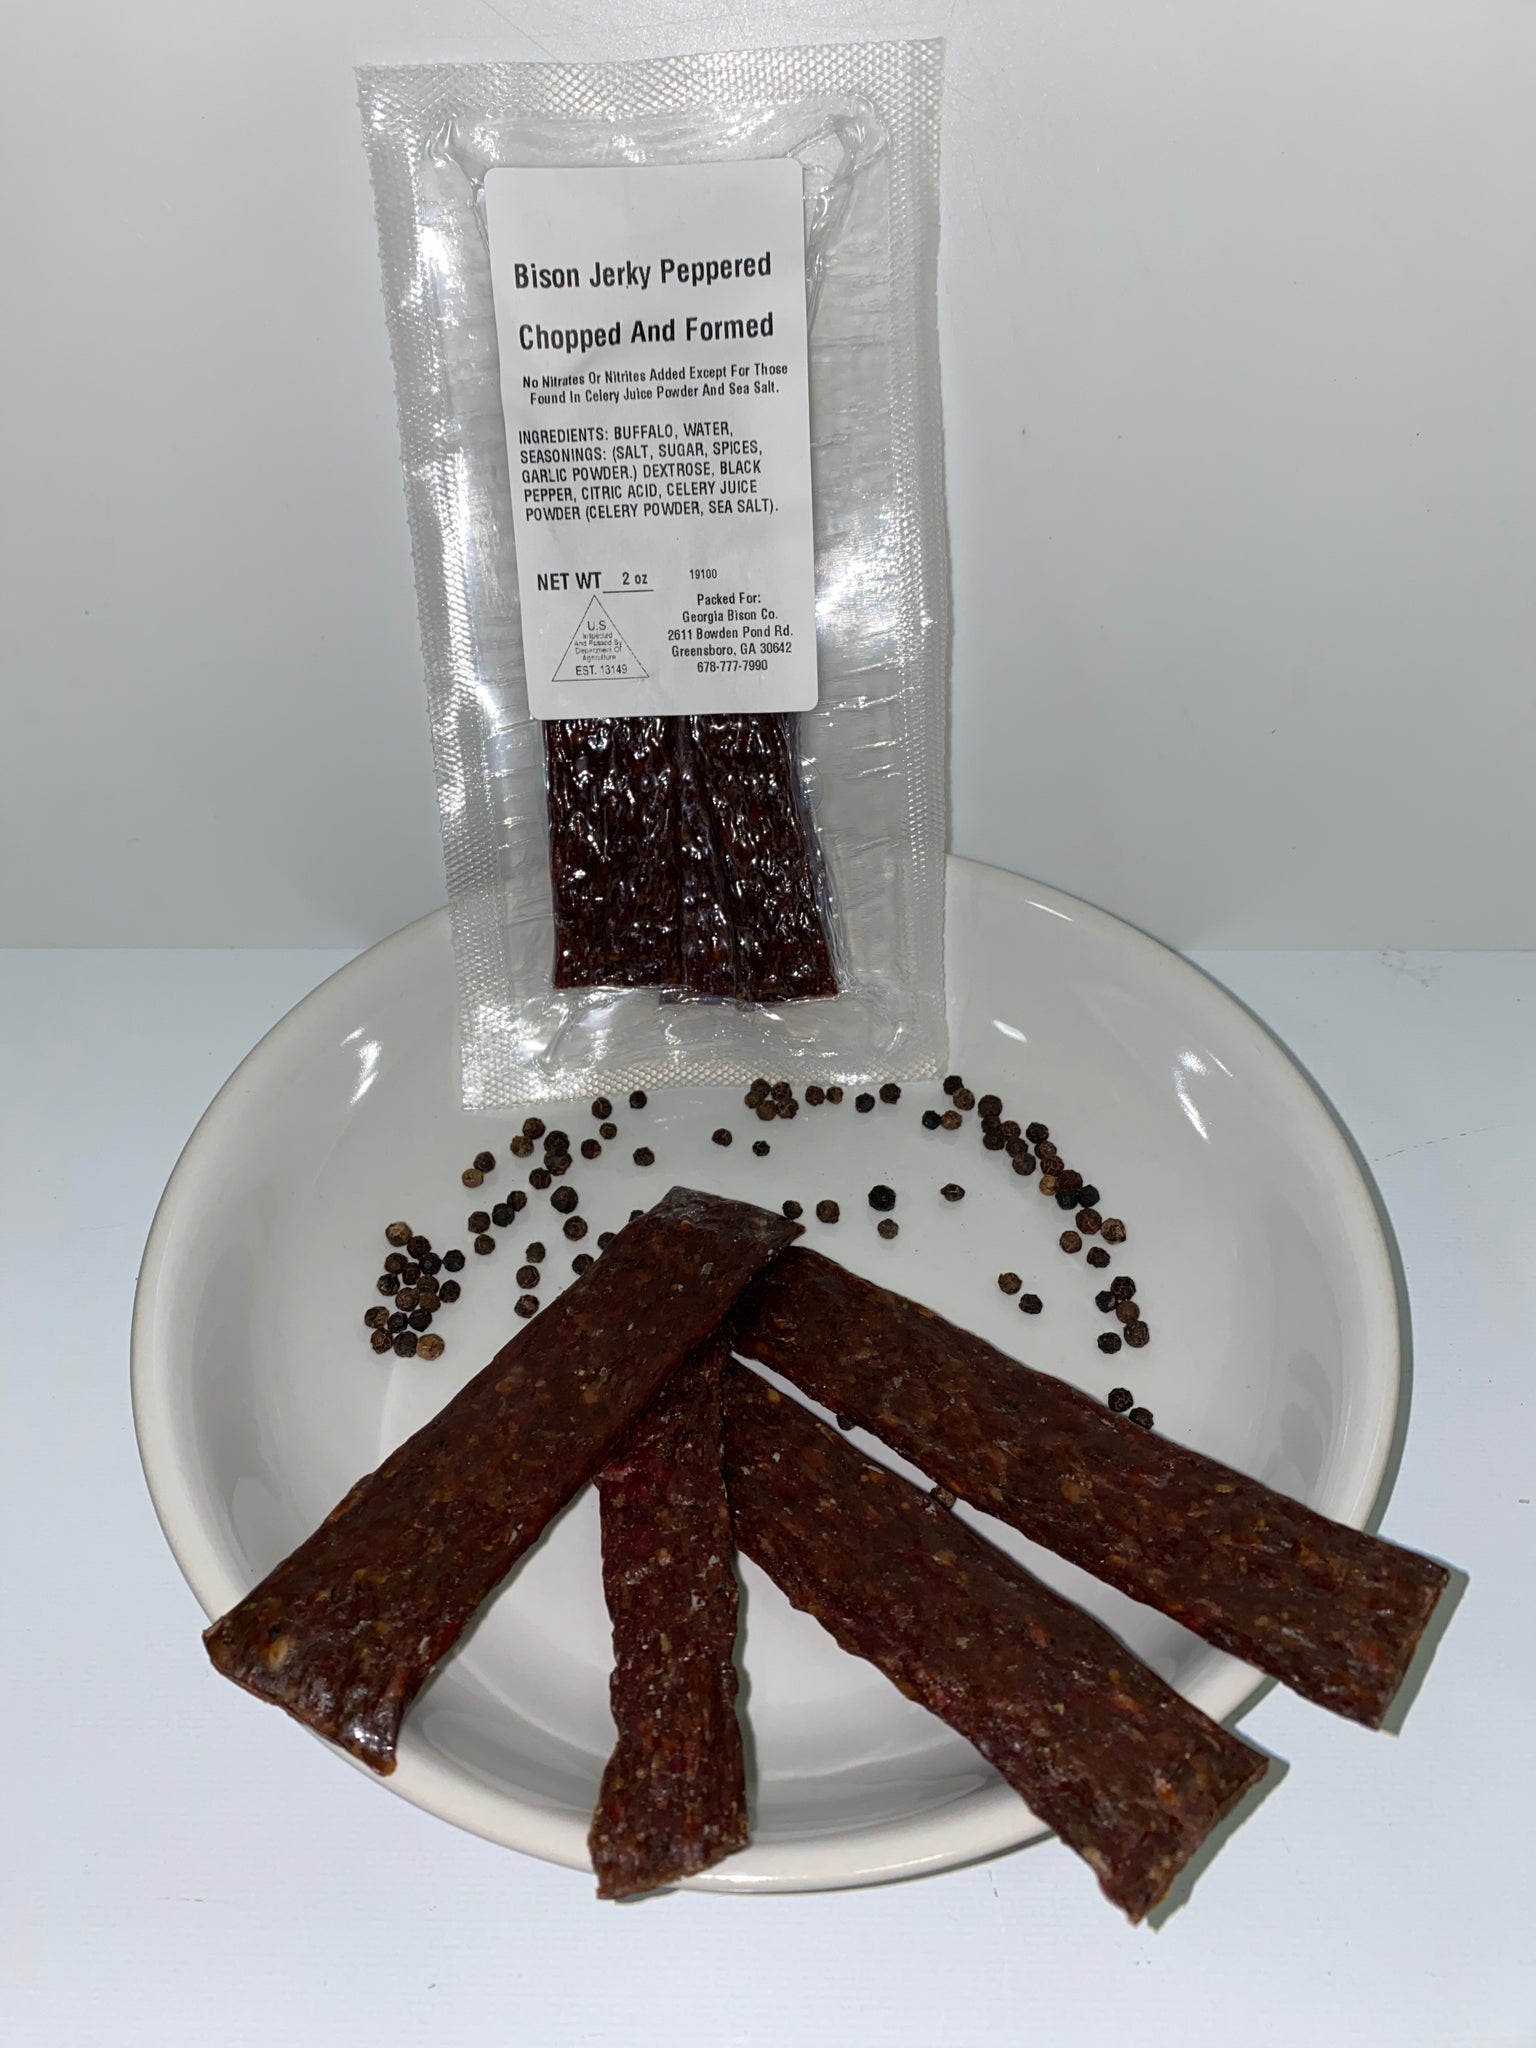 Bison Jerky Peppered - Dish Display